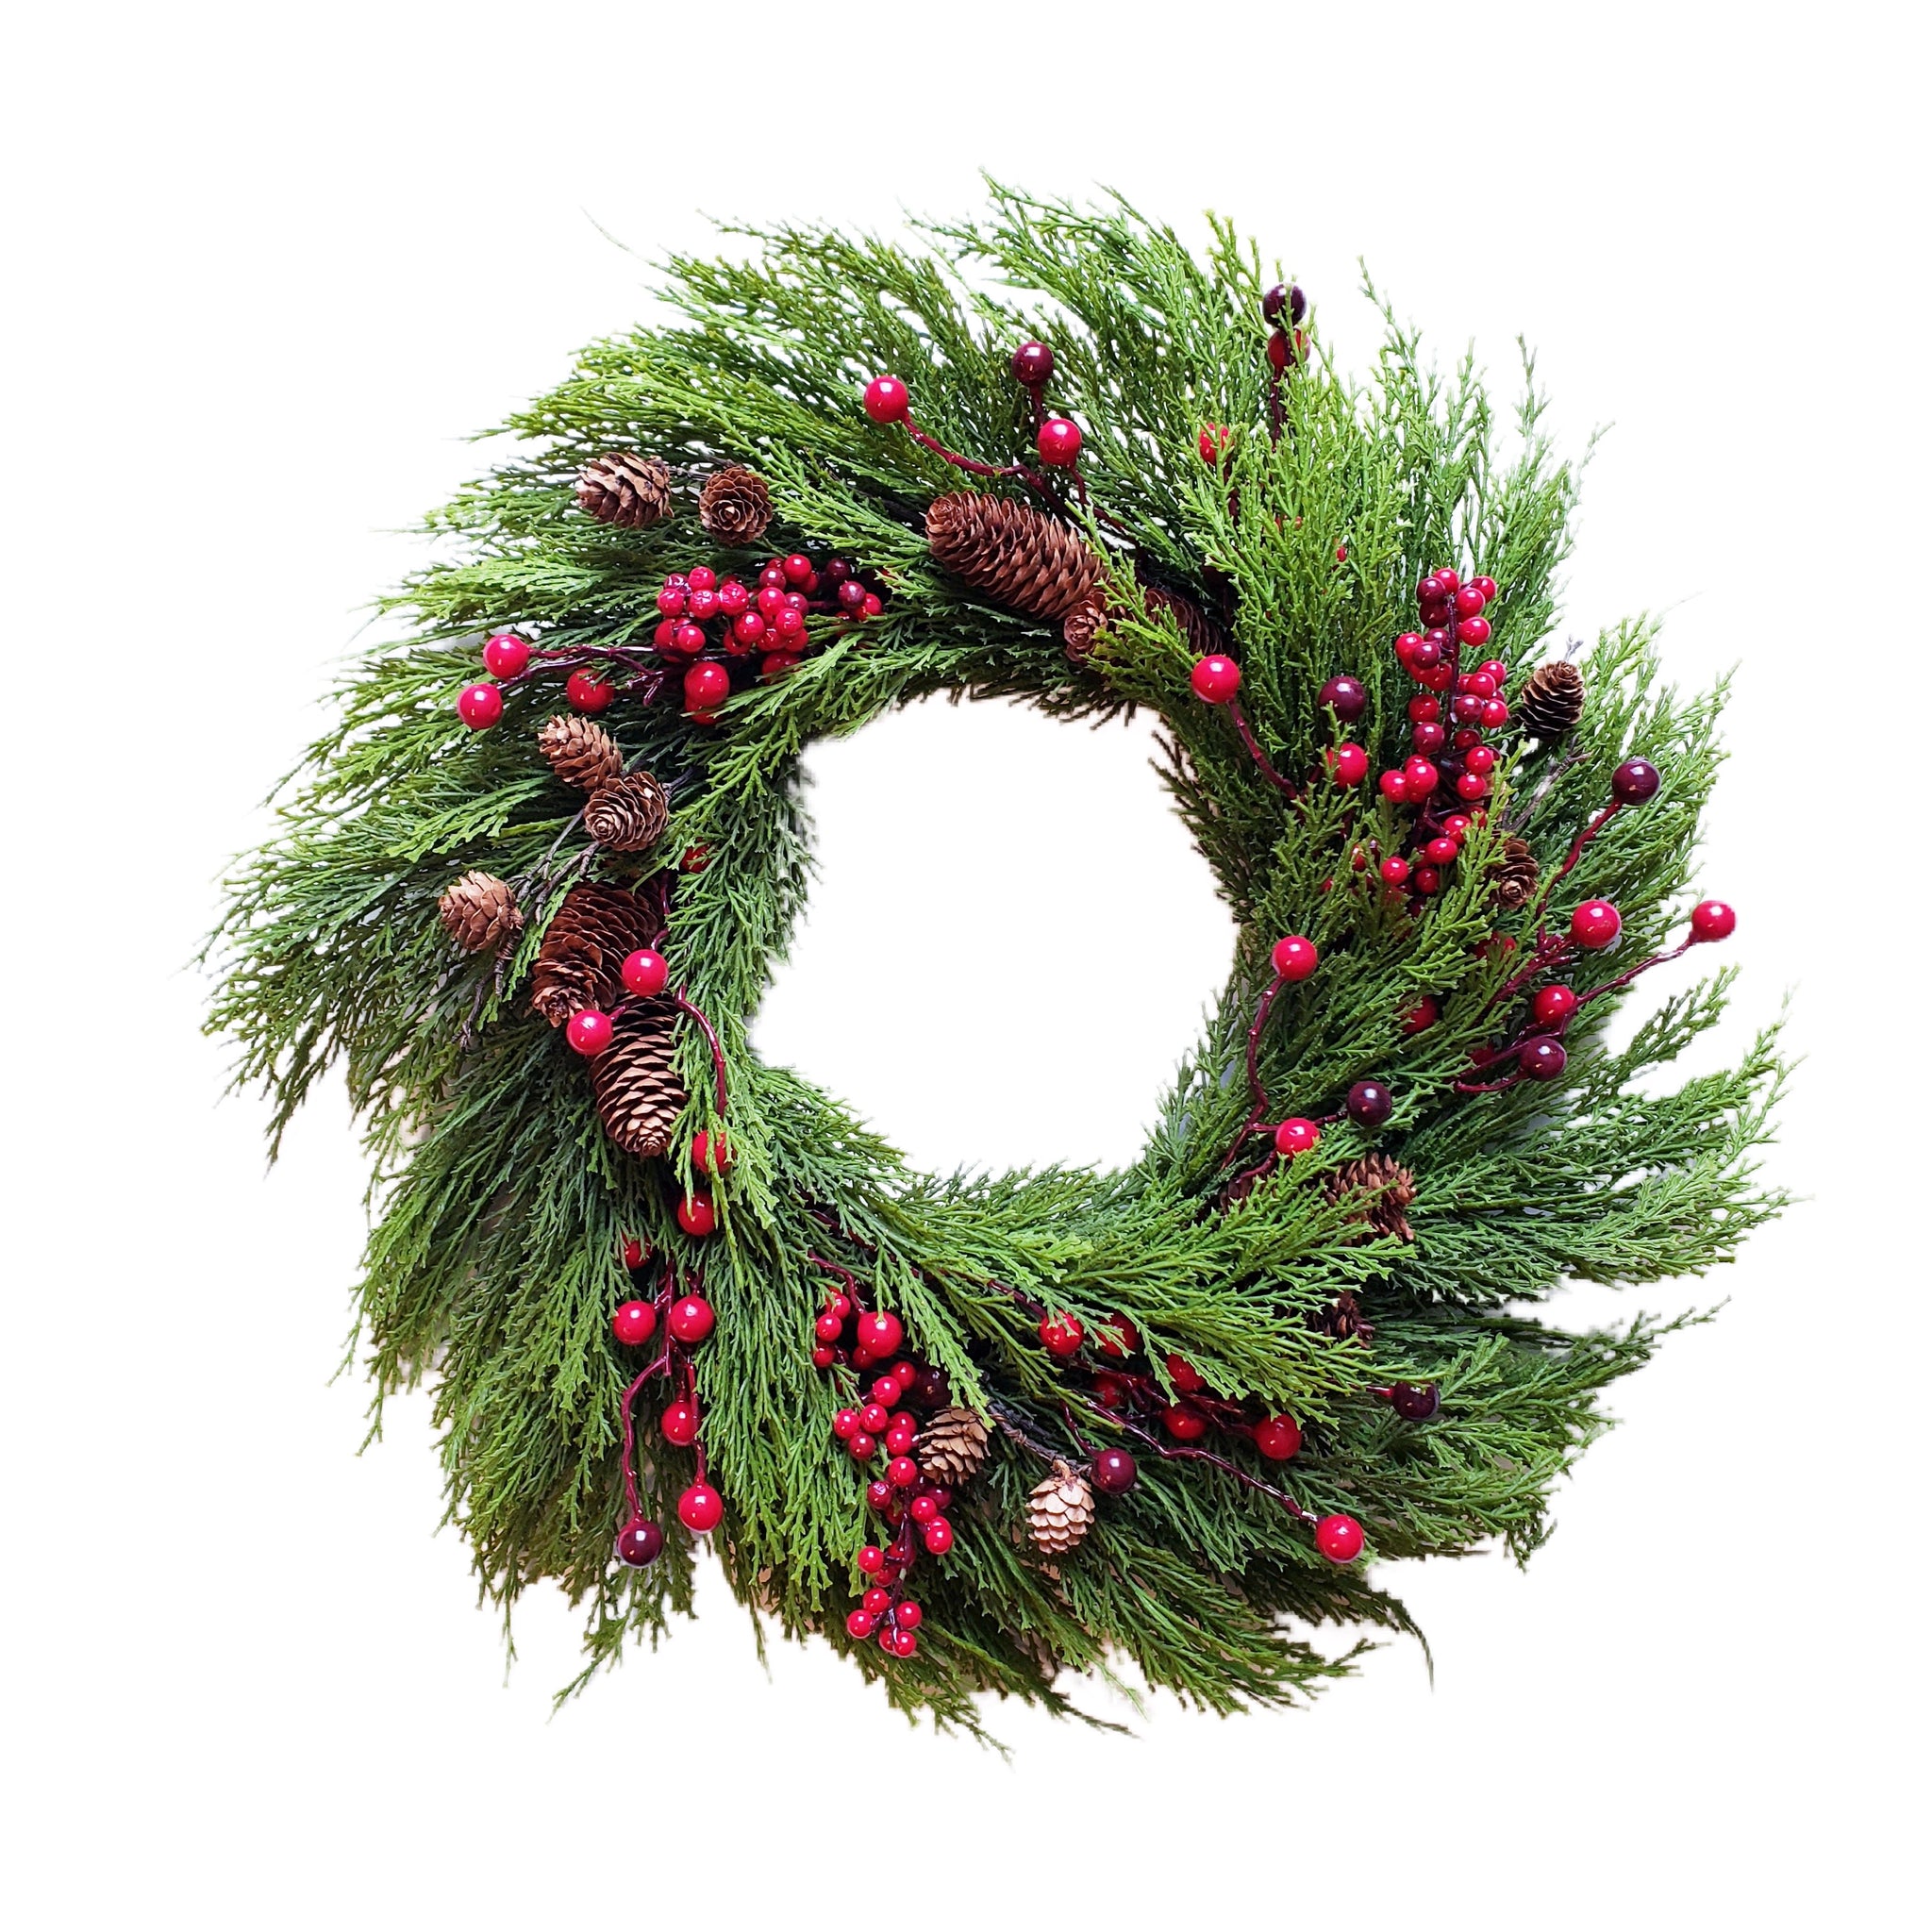 24" Pine With Berry Wreath